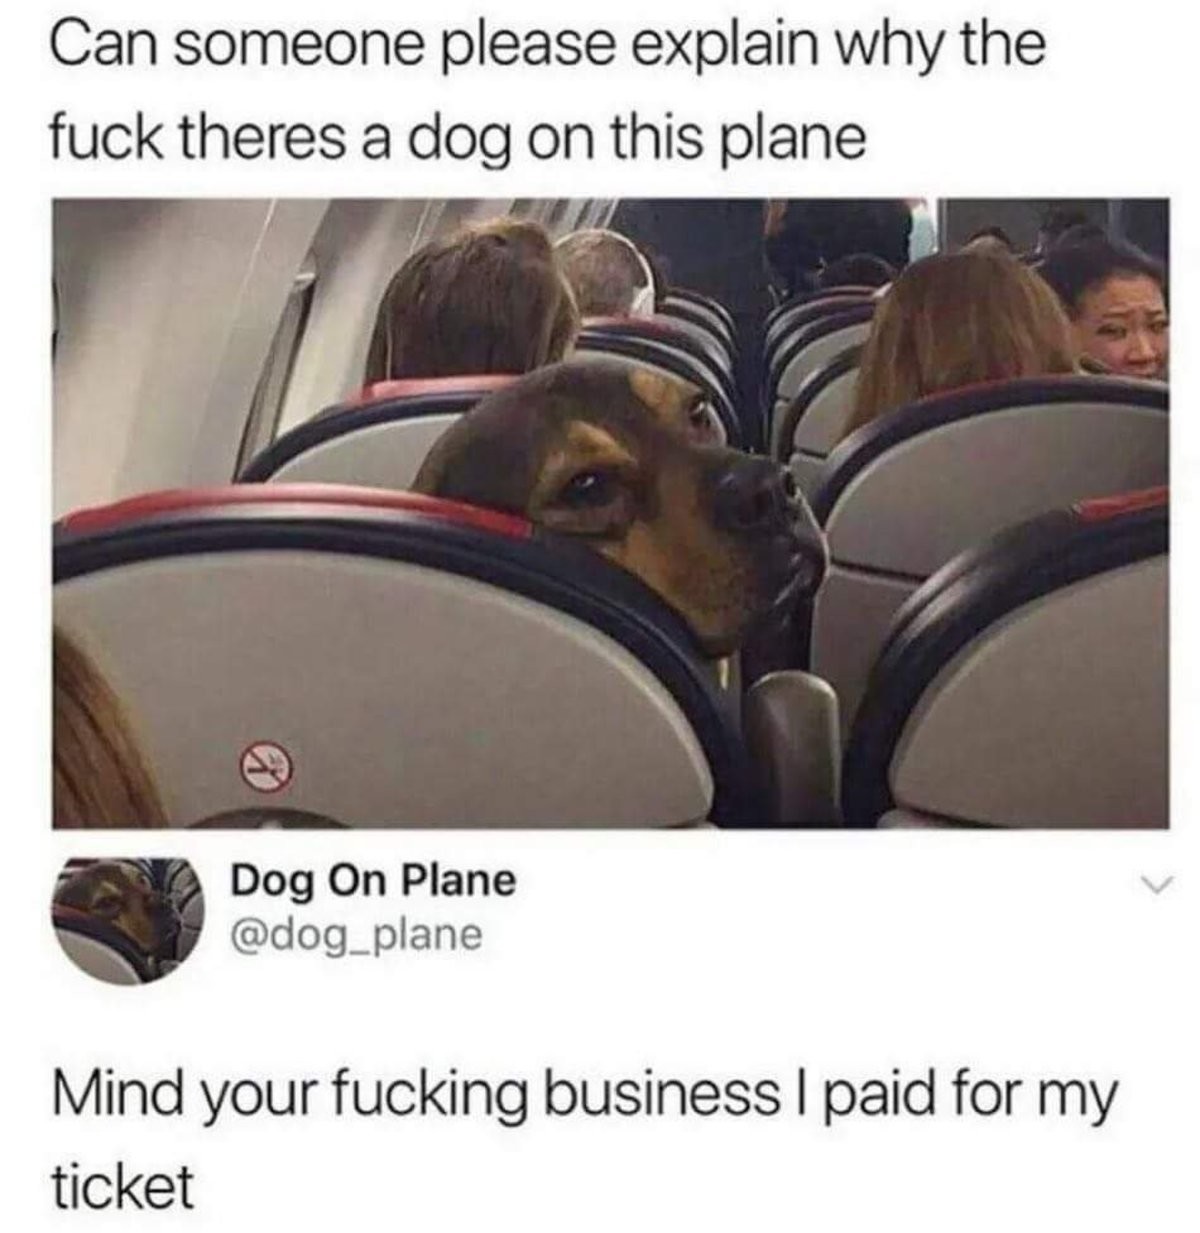 He paid. . iii% ] explain why (, Dog on Plane Mind your [!! business I _. for my ticket. I think it's kinda retarded to make a quick throwaway account for a joke. I don't know why tho